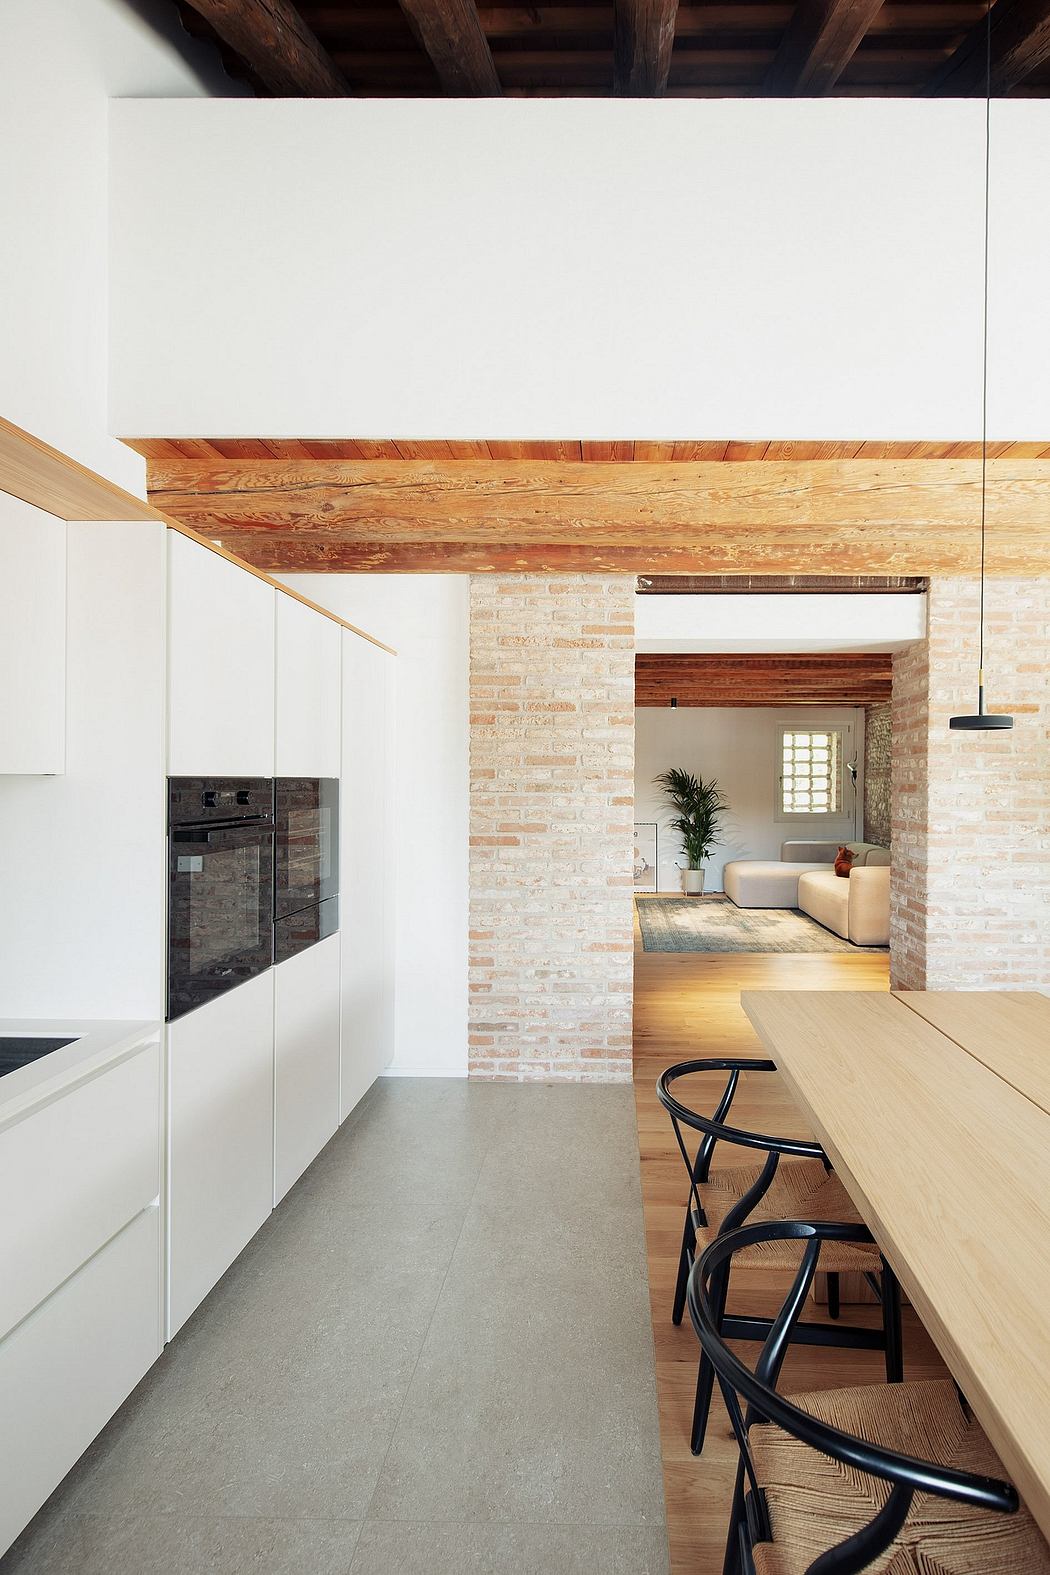 Warm wooden beams, exposed brick walls, and sleek white cabinetry create a modern yet cozy kitchen.